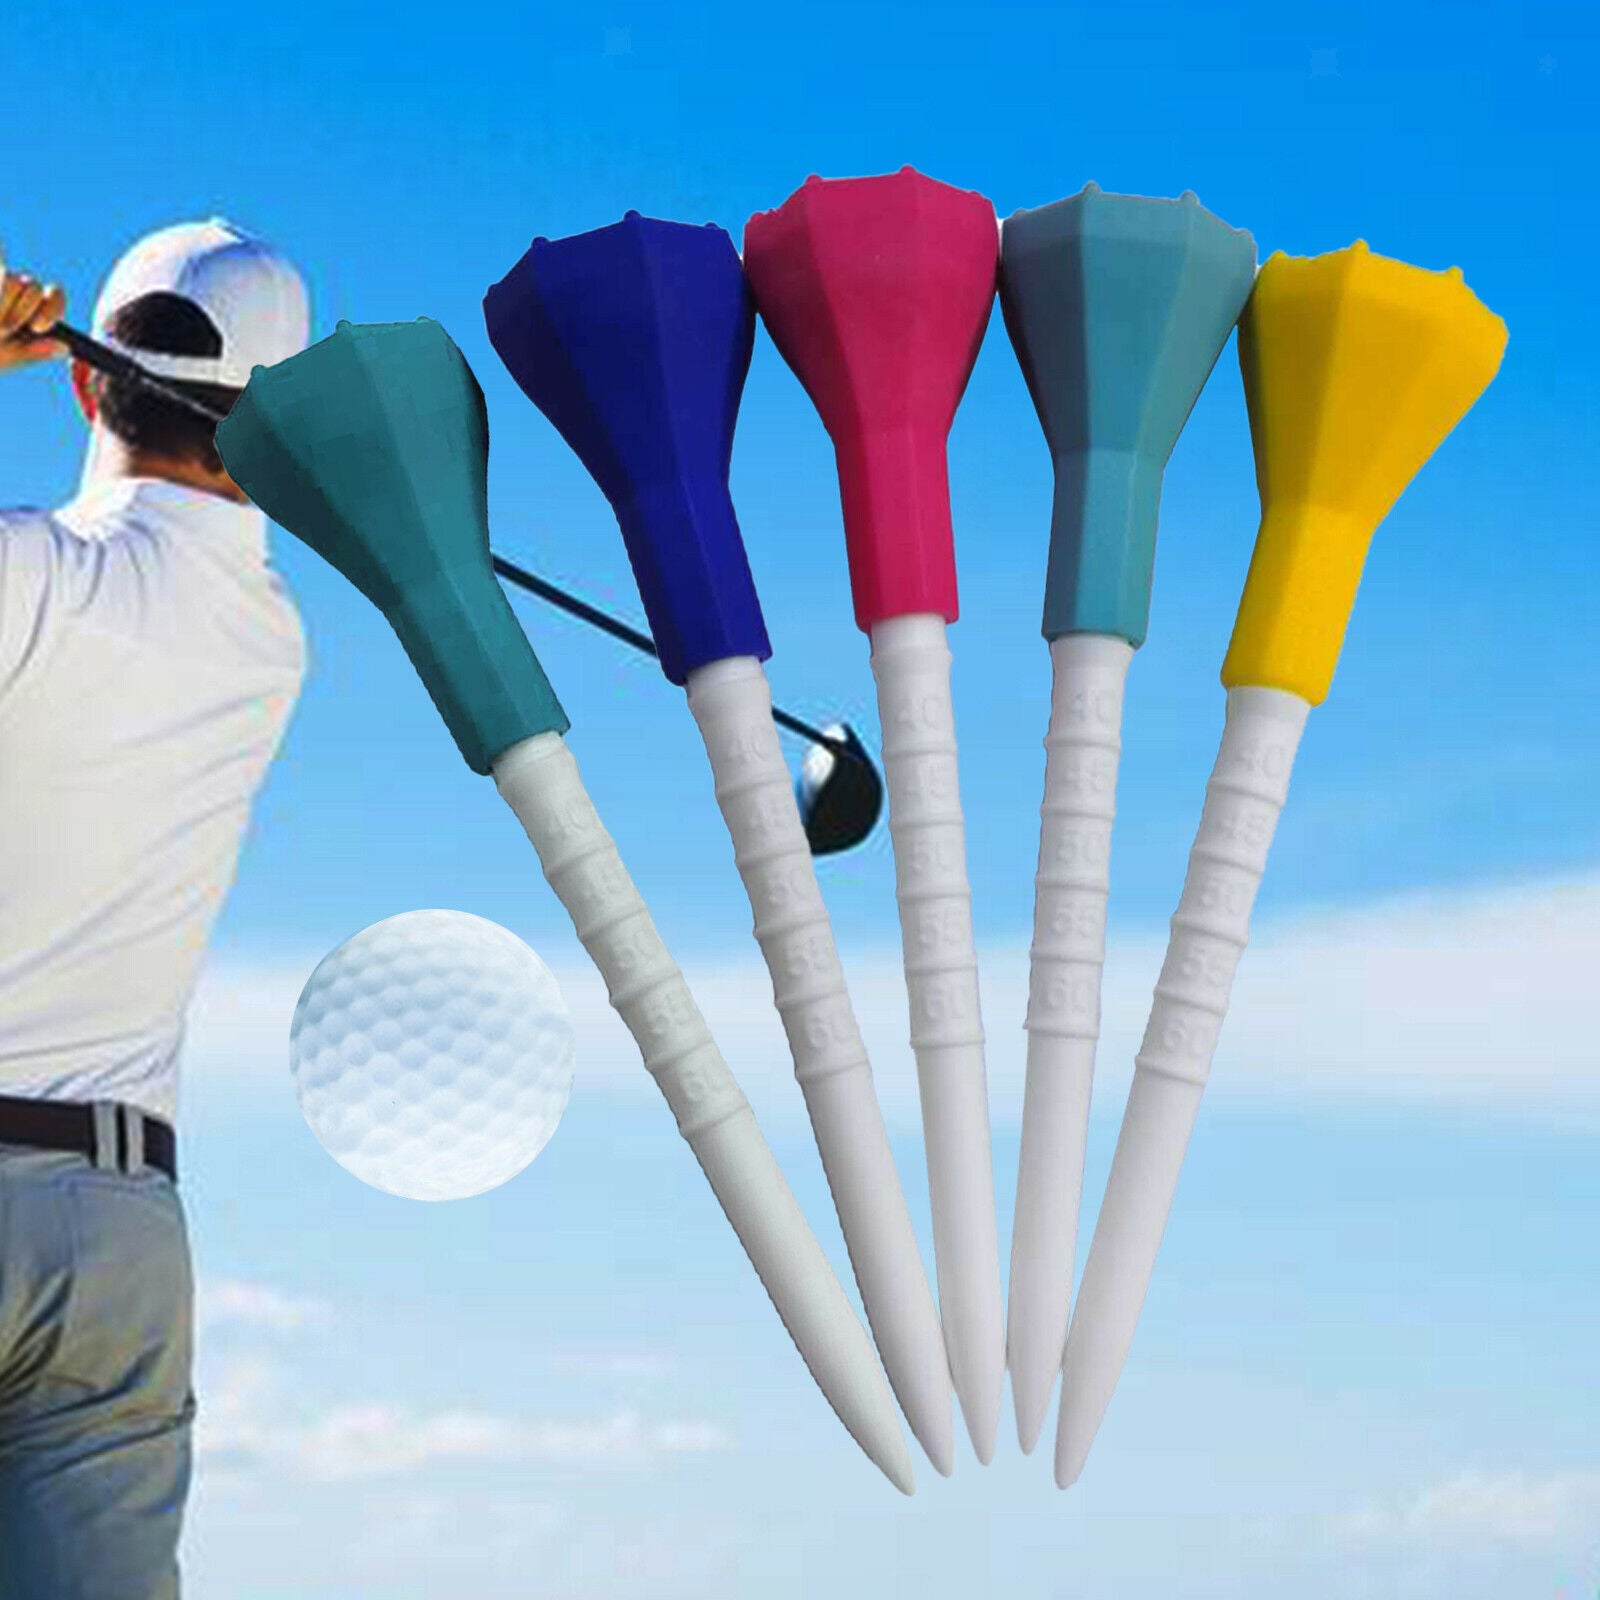 5Pack Plastic Golf Tees Golf Tee Golf Practice Outdoor Sports Accessories